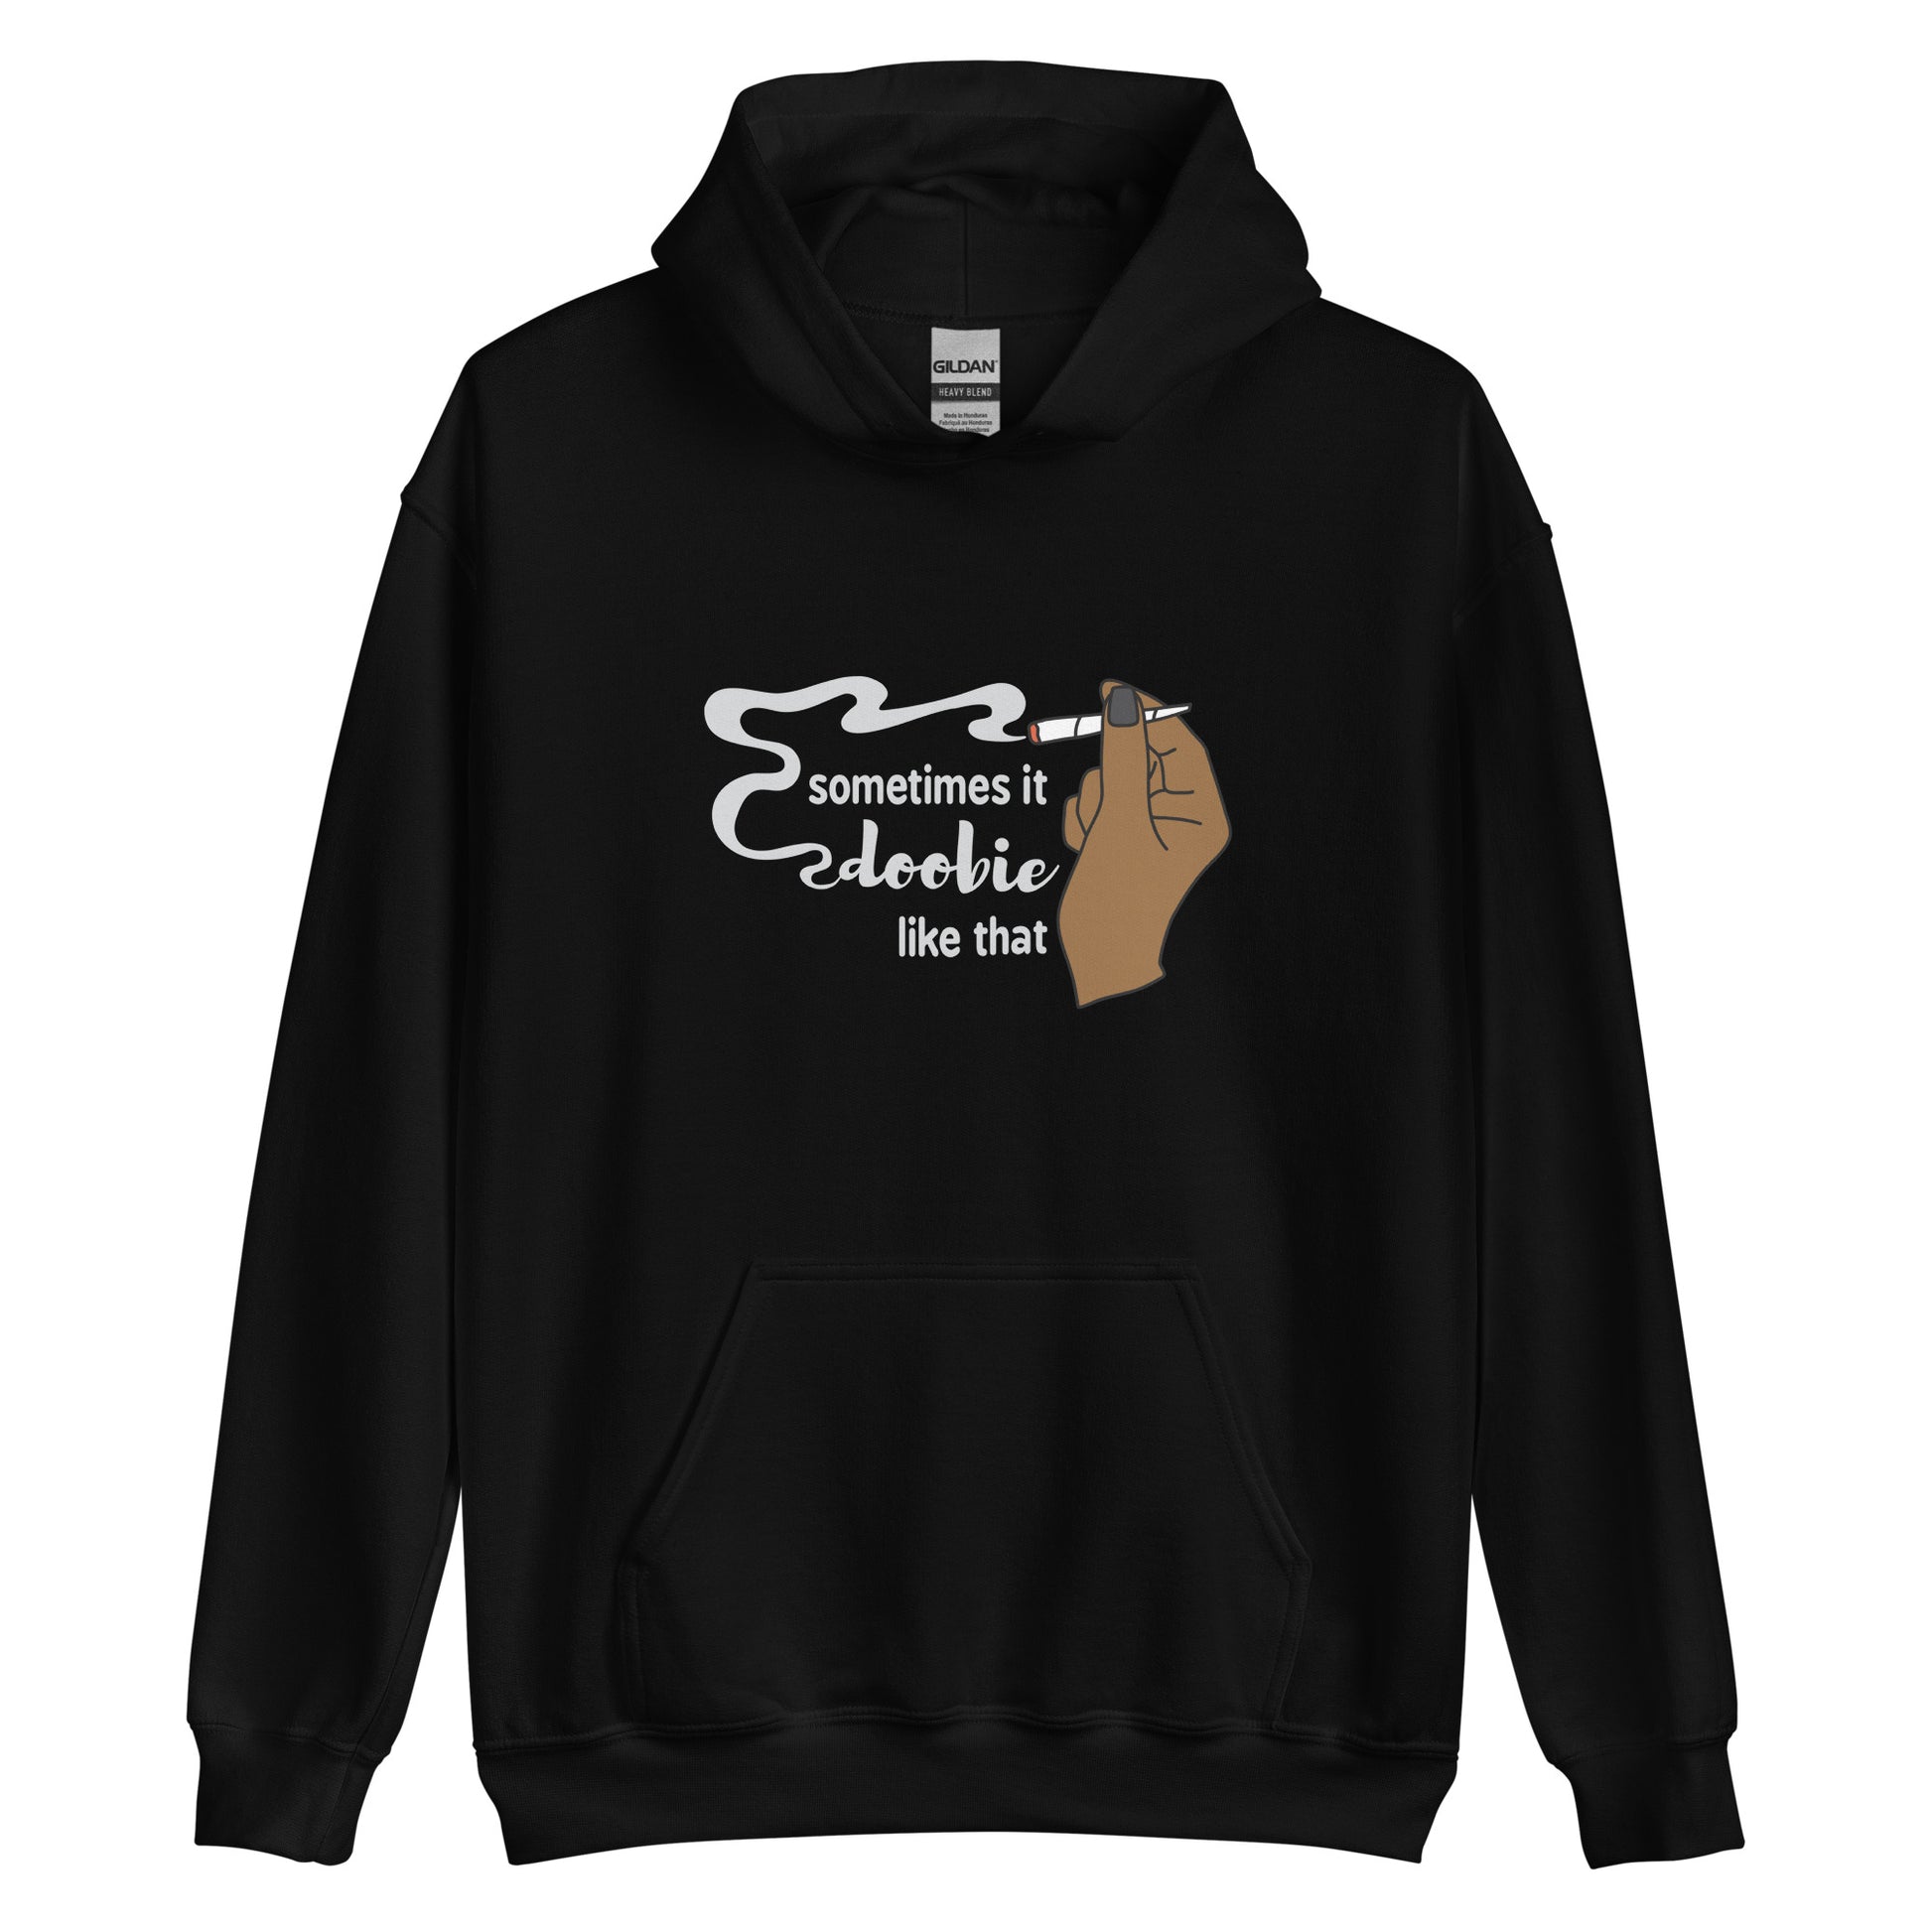 A black hooded sweatshirt featuring an illustration of a hand holding a smoking joint. Text alongside the hand reads "Sometimes it doobie like that" with the word "doobie" made of smoke from the joint.